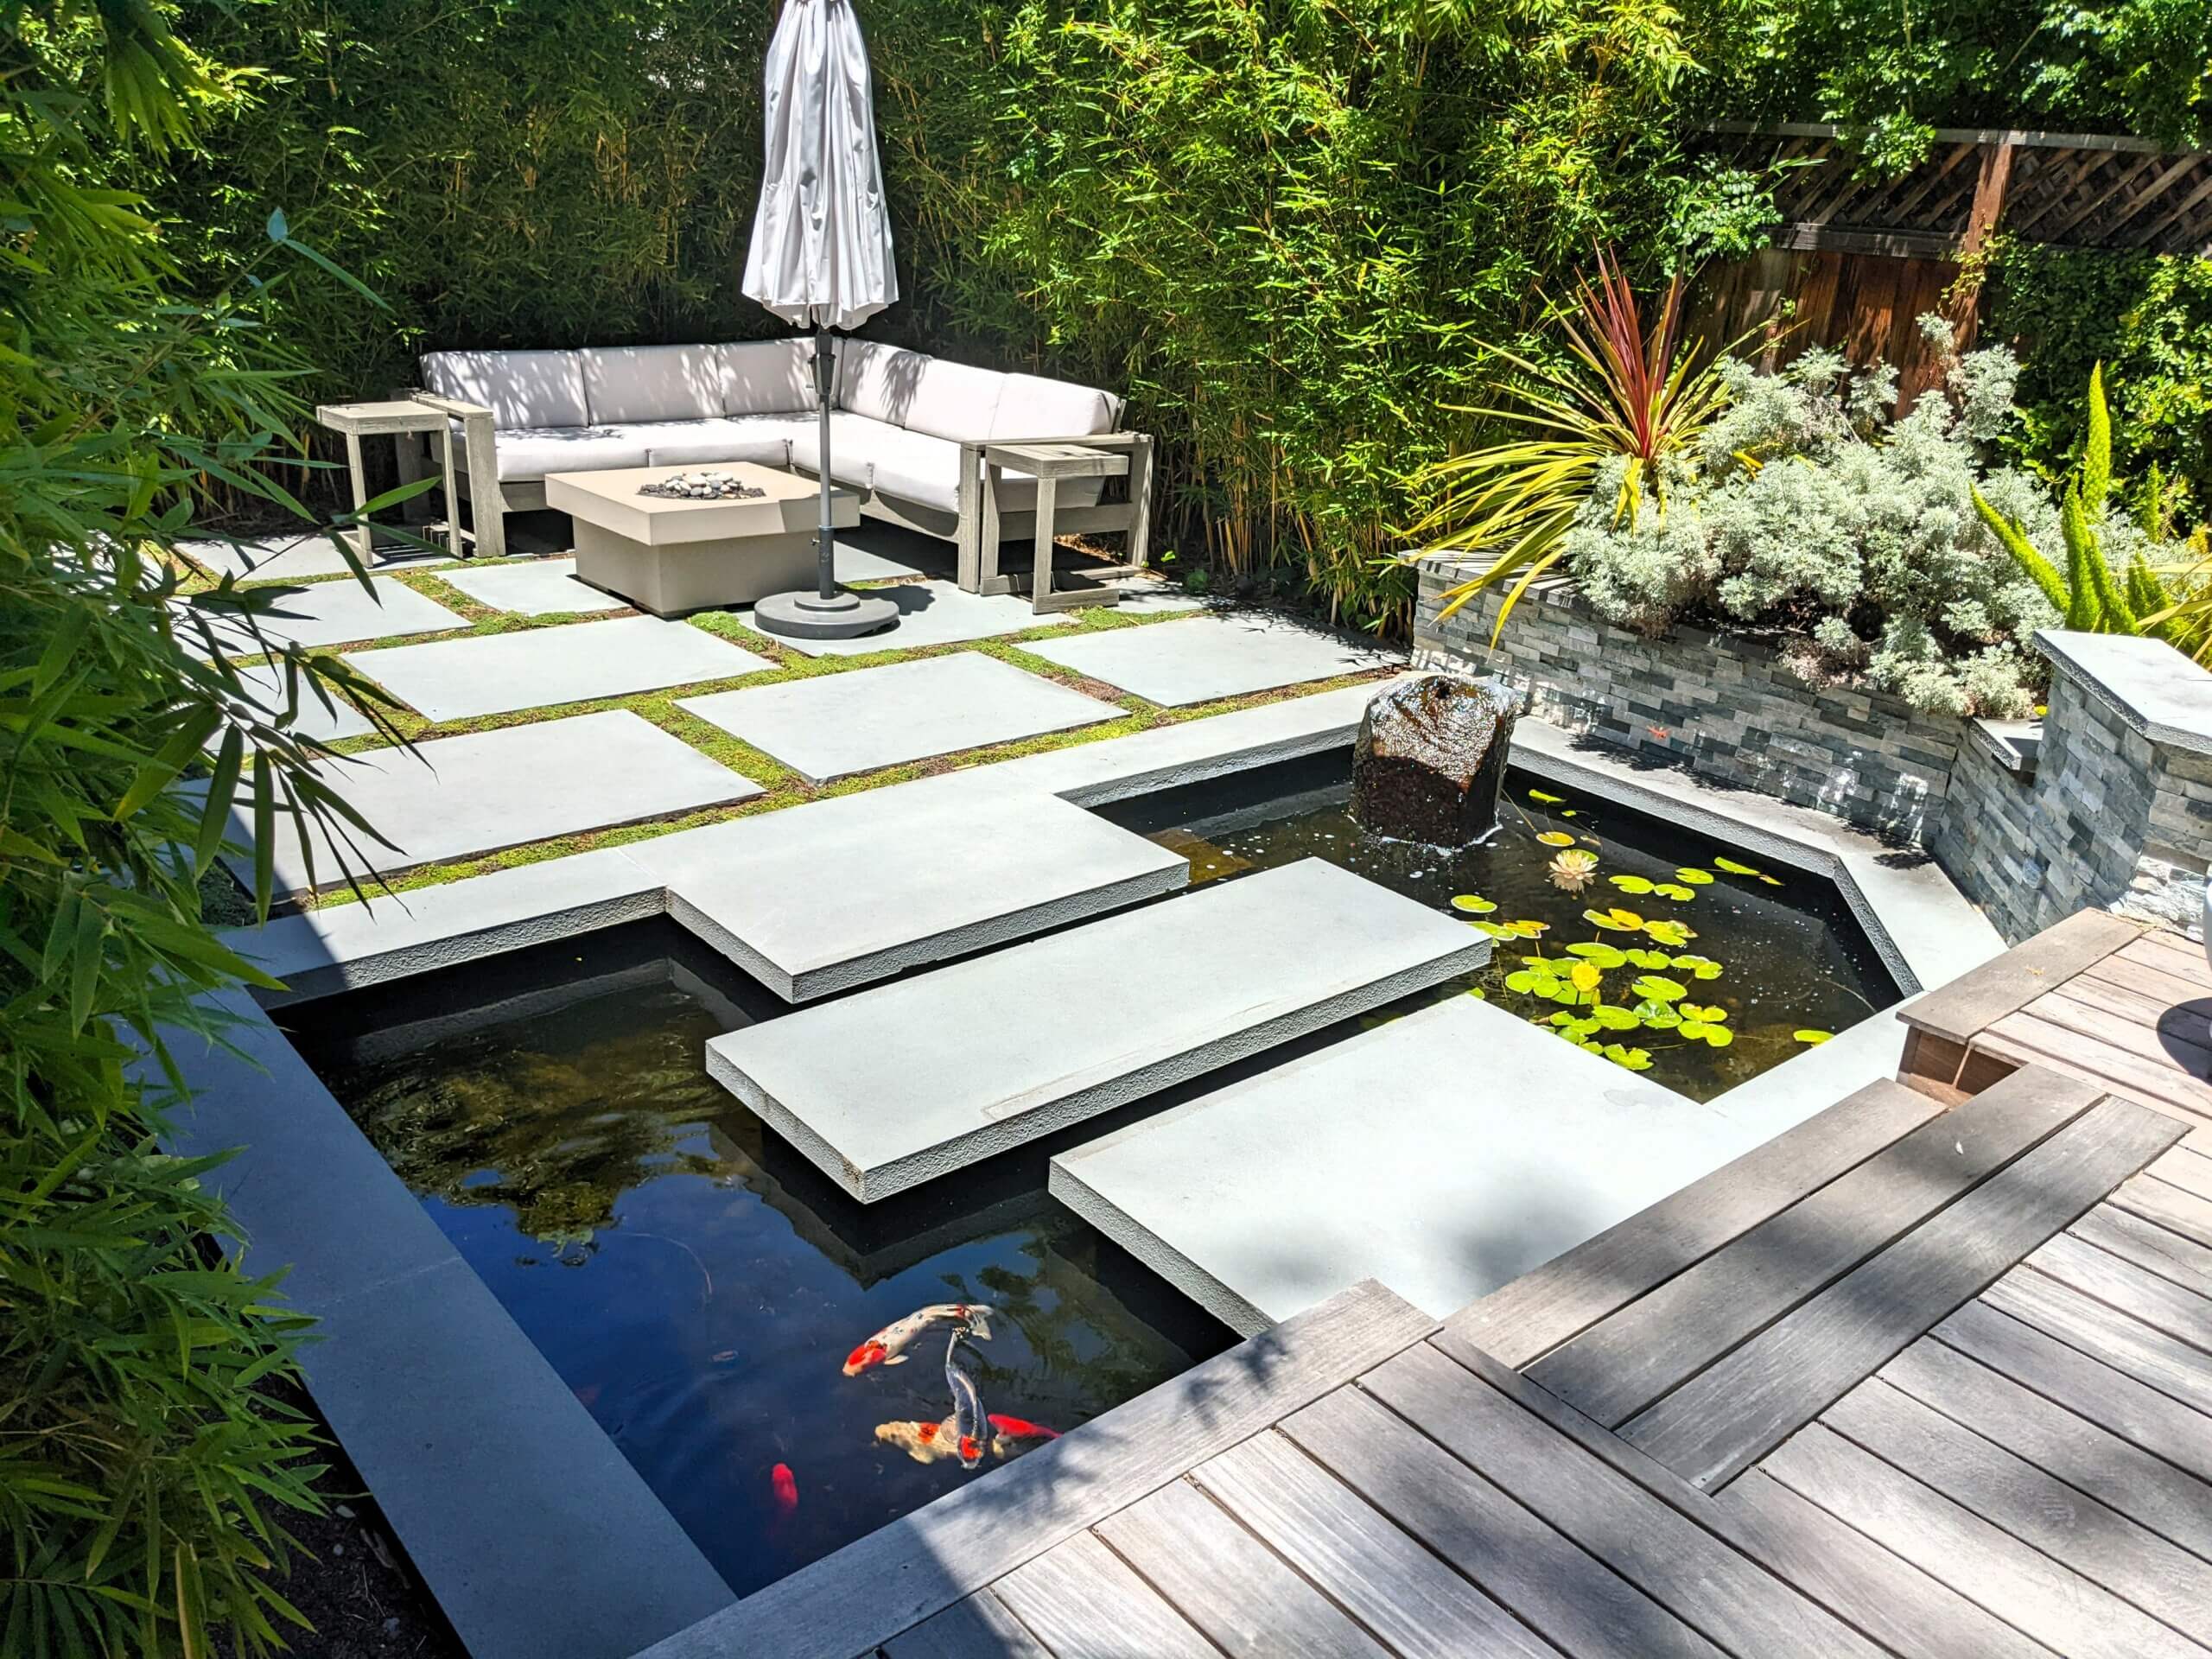 Floating stone steps crossing koi pond to backyard fire pit area